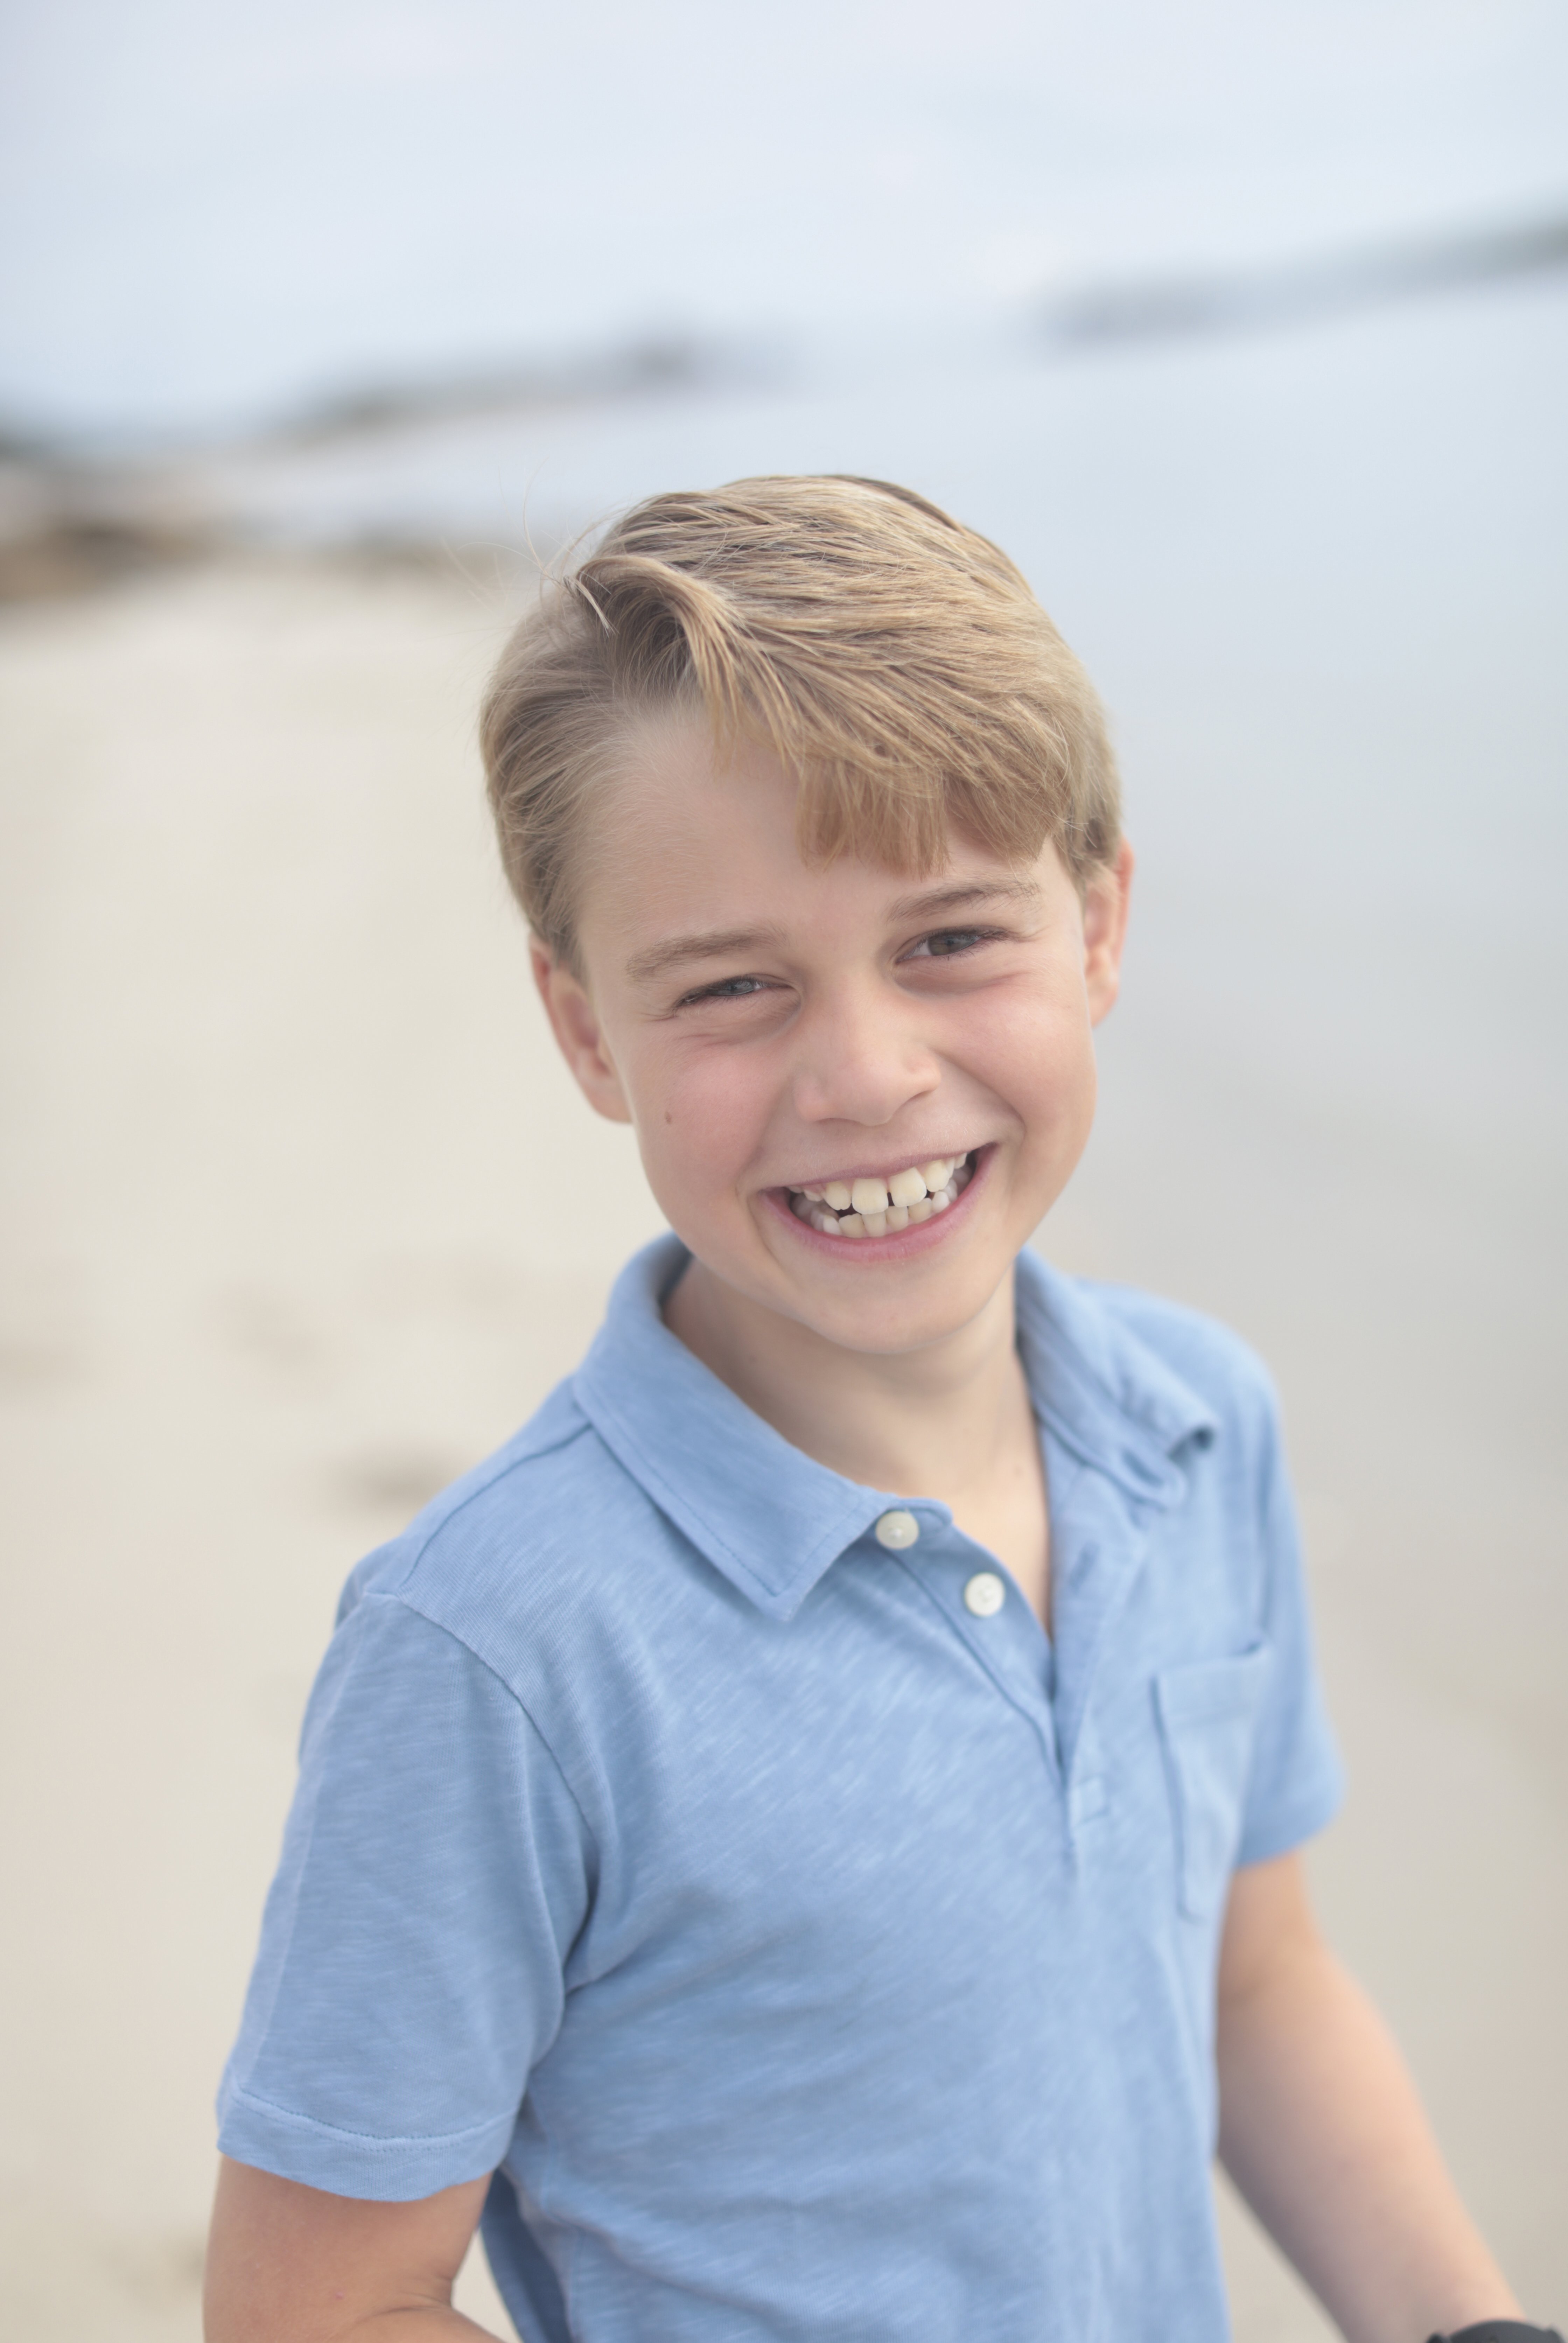 Prince George is seen in a portrait taken by his mother the Duchess of Cambridge on holiday in the UK earlier this month on July 2022 in United Kingdom. | Source: Getty Images